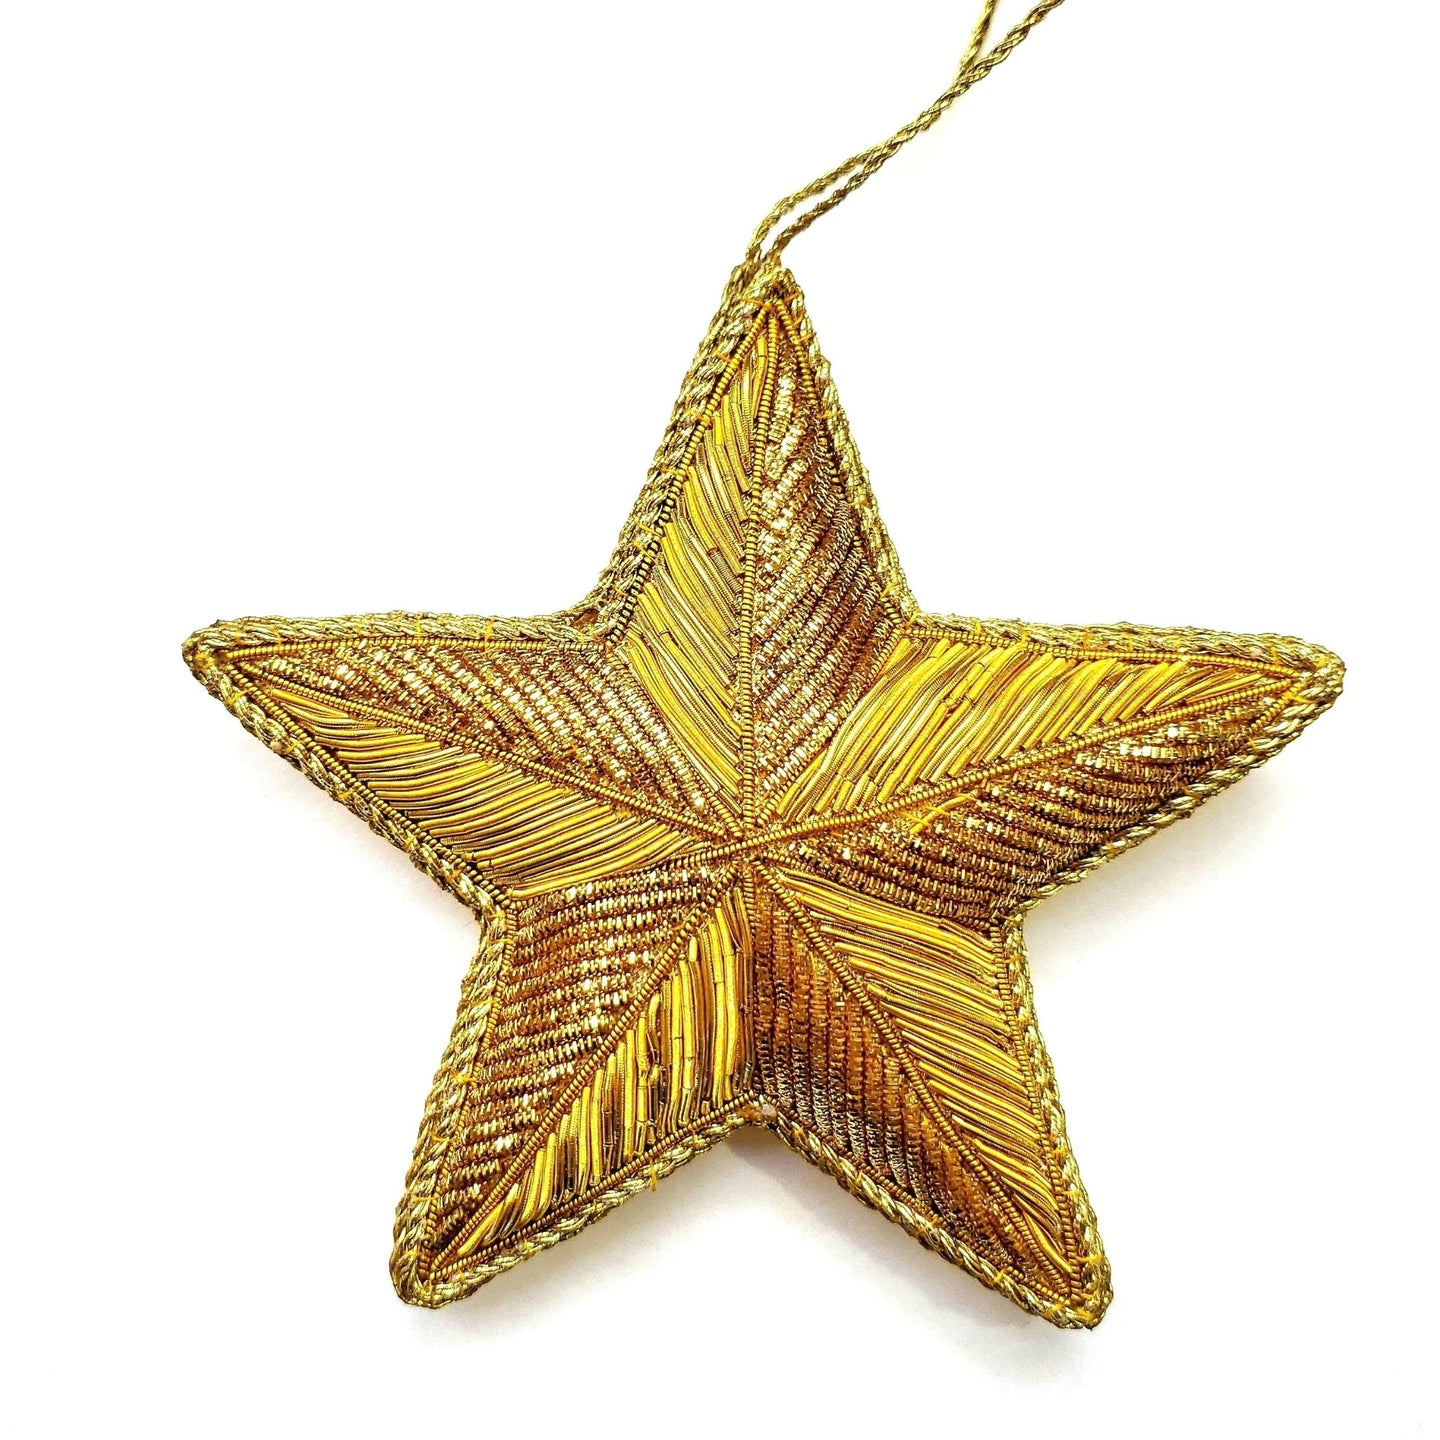 Embroidered gold star Christmas ornament or wreath ornament. 